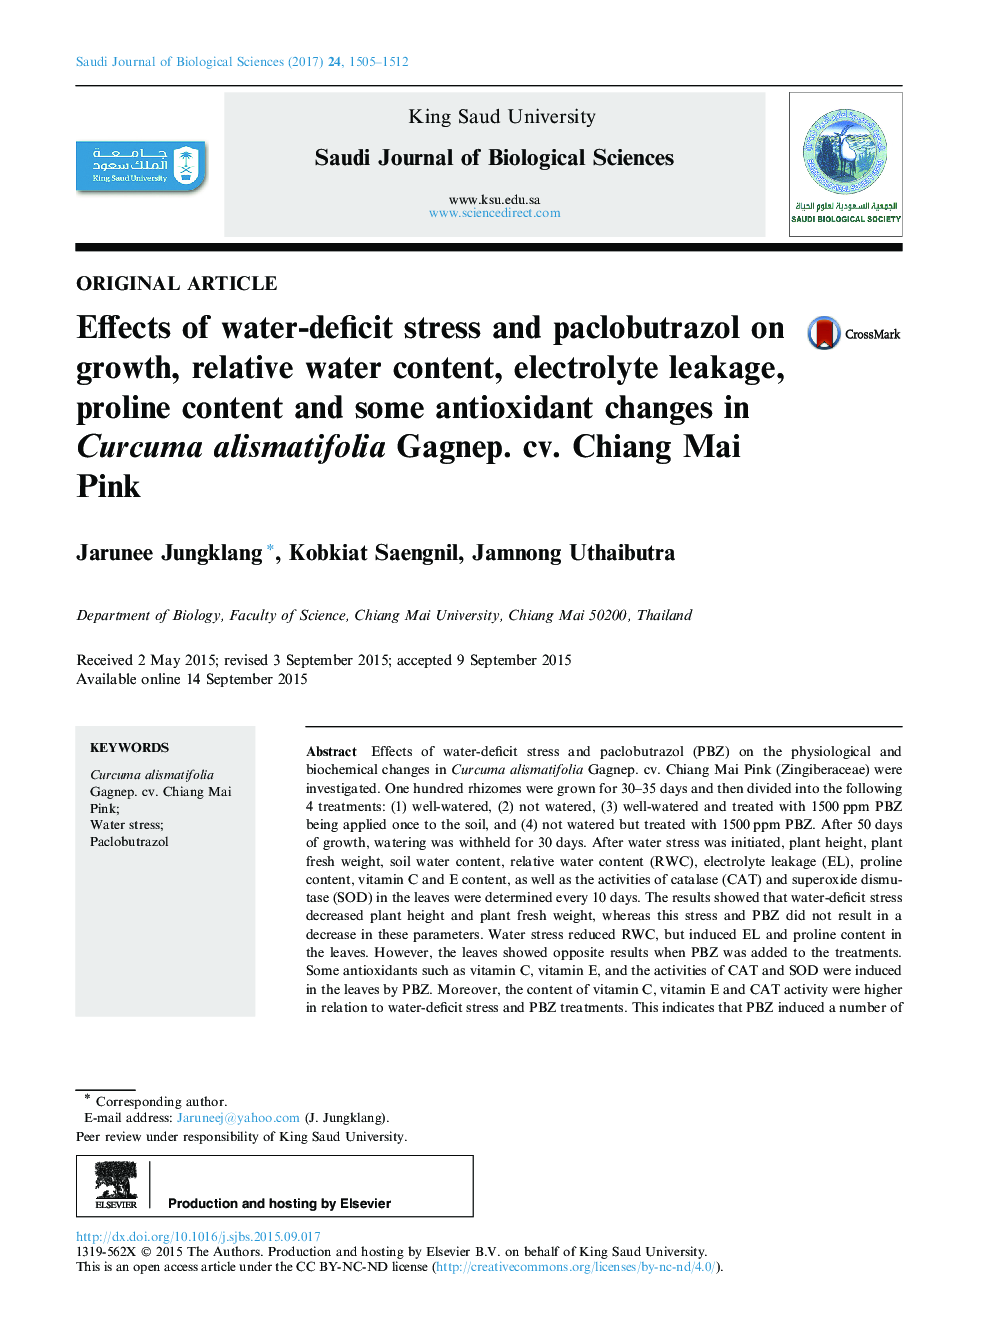 Original articleEffects of water-deficit stress and paclobutrazol on growth, relative water content, electrolyte leakage, proline content and some antioxidant changes in Curcuma alismatifolia Gagnep. cv. Chiang Mai Pink